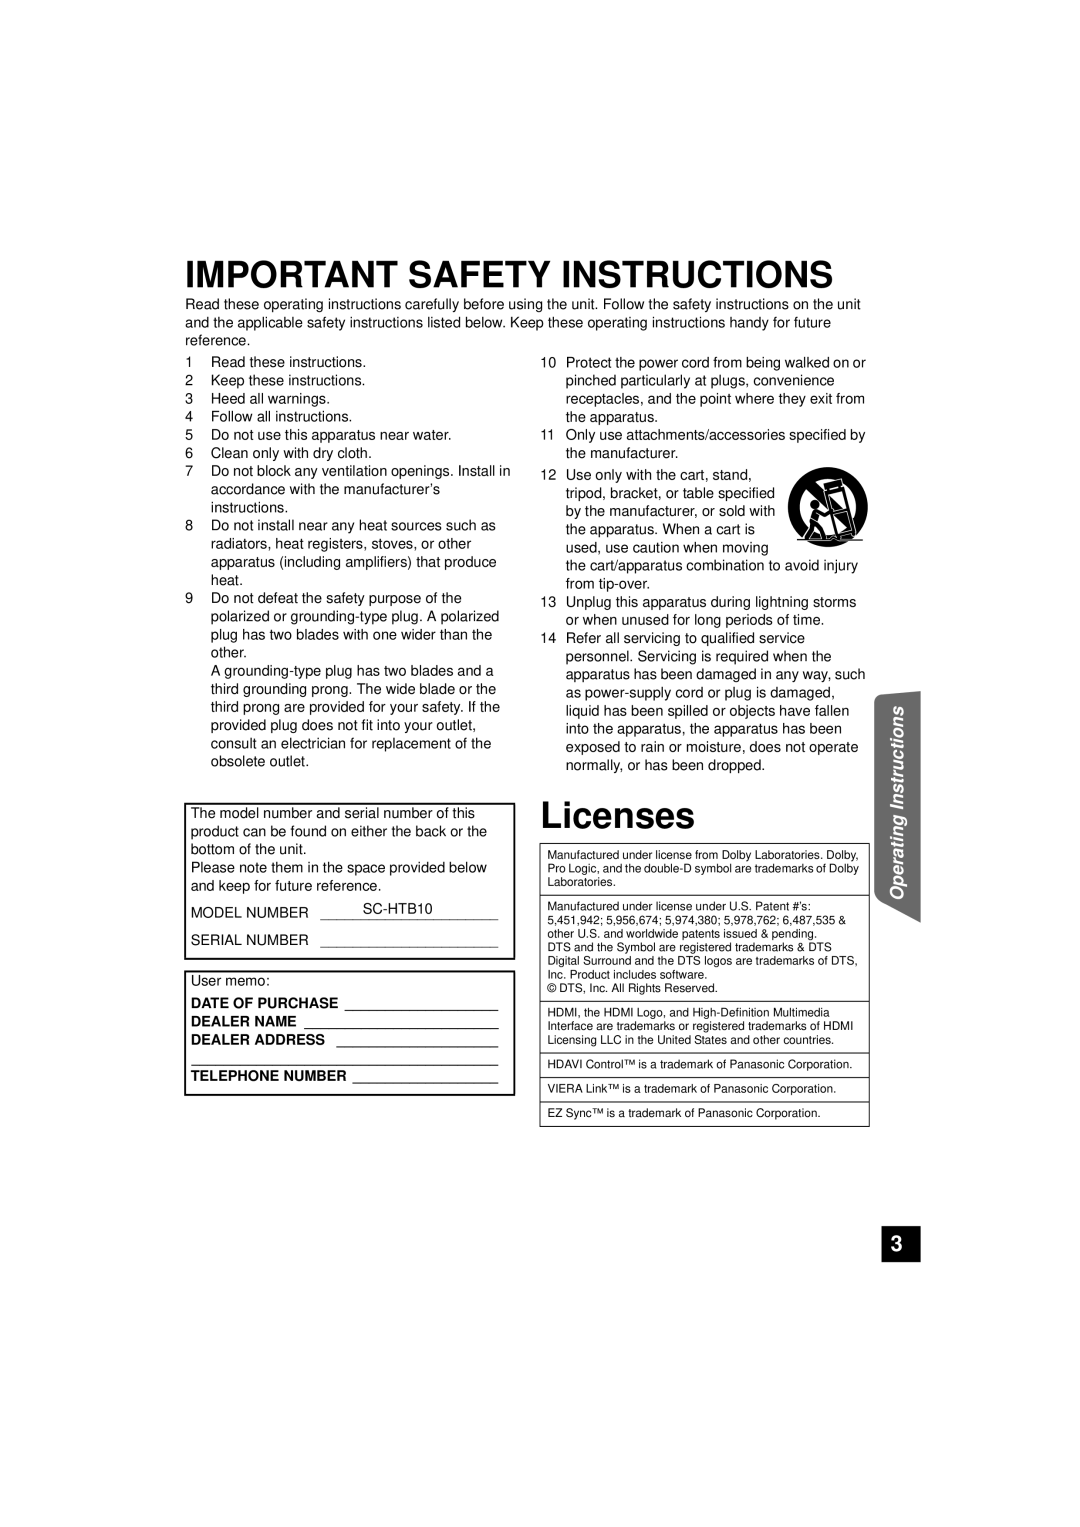 Panasonic RQTX1165-1P, SC-HTB10 operating instructions Important Safety Instructions, Licenses, Operating Instructions 